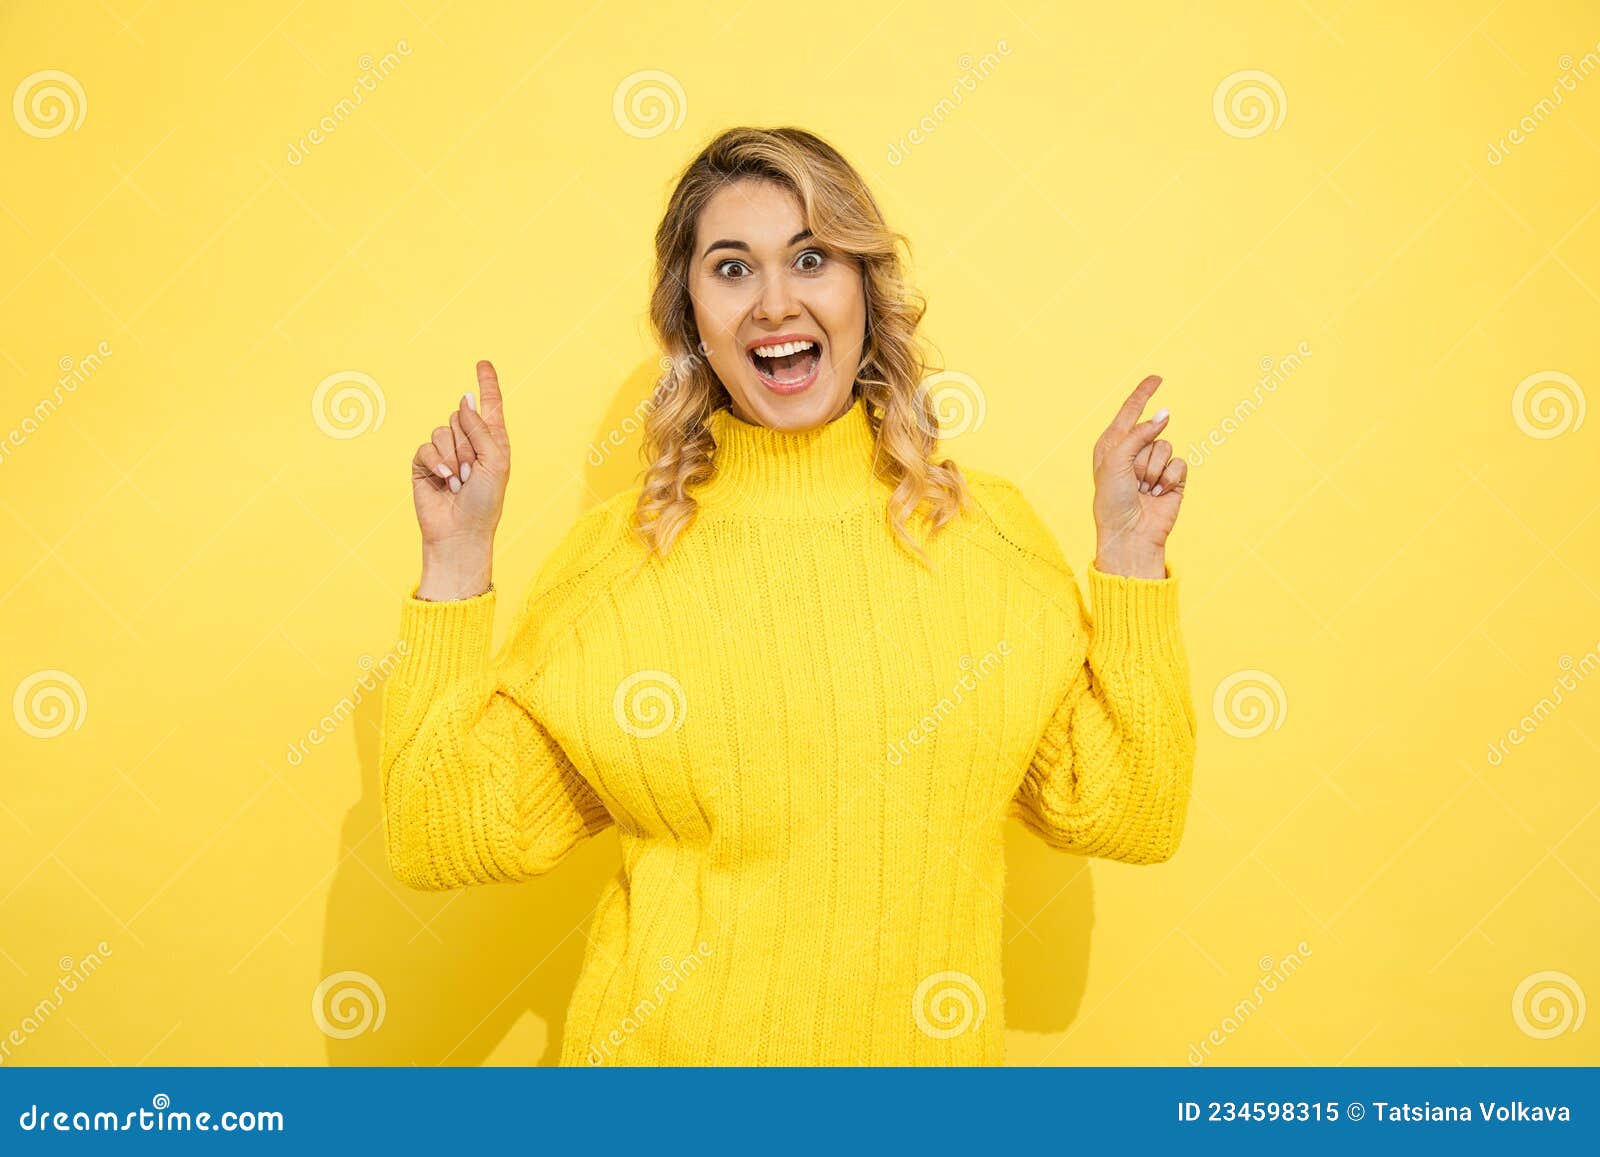 young cute beautiful happy smiling woman wearing yellow sweater standing over yellow  background, pointing with hands to